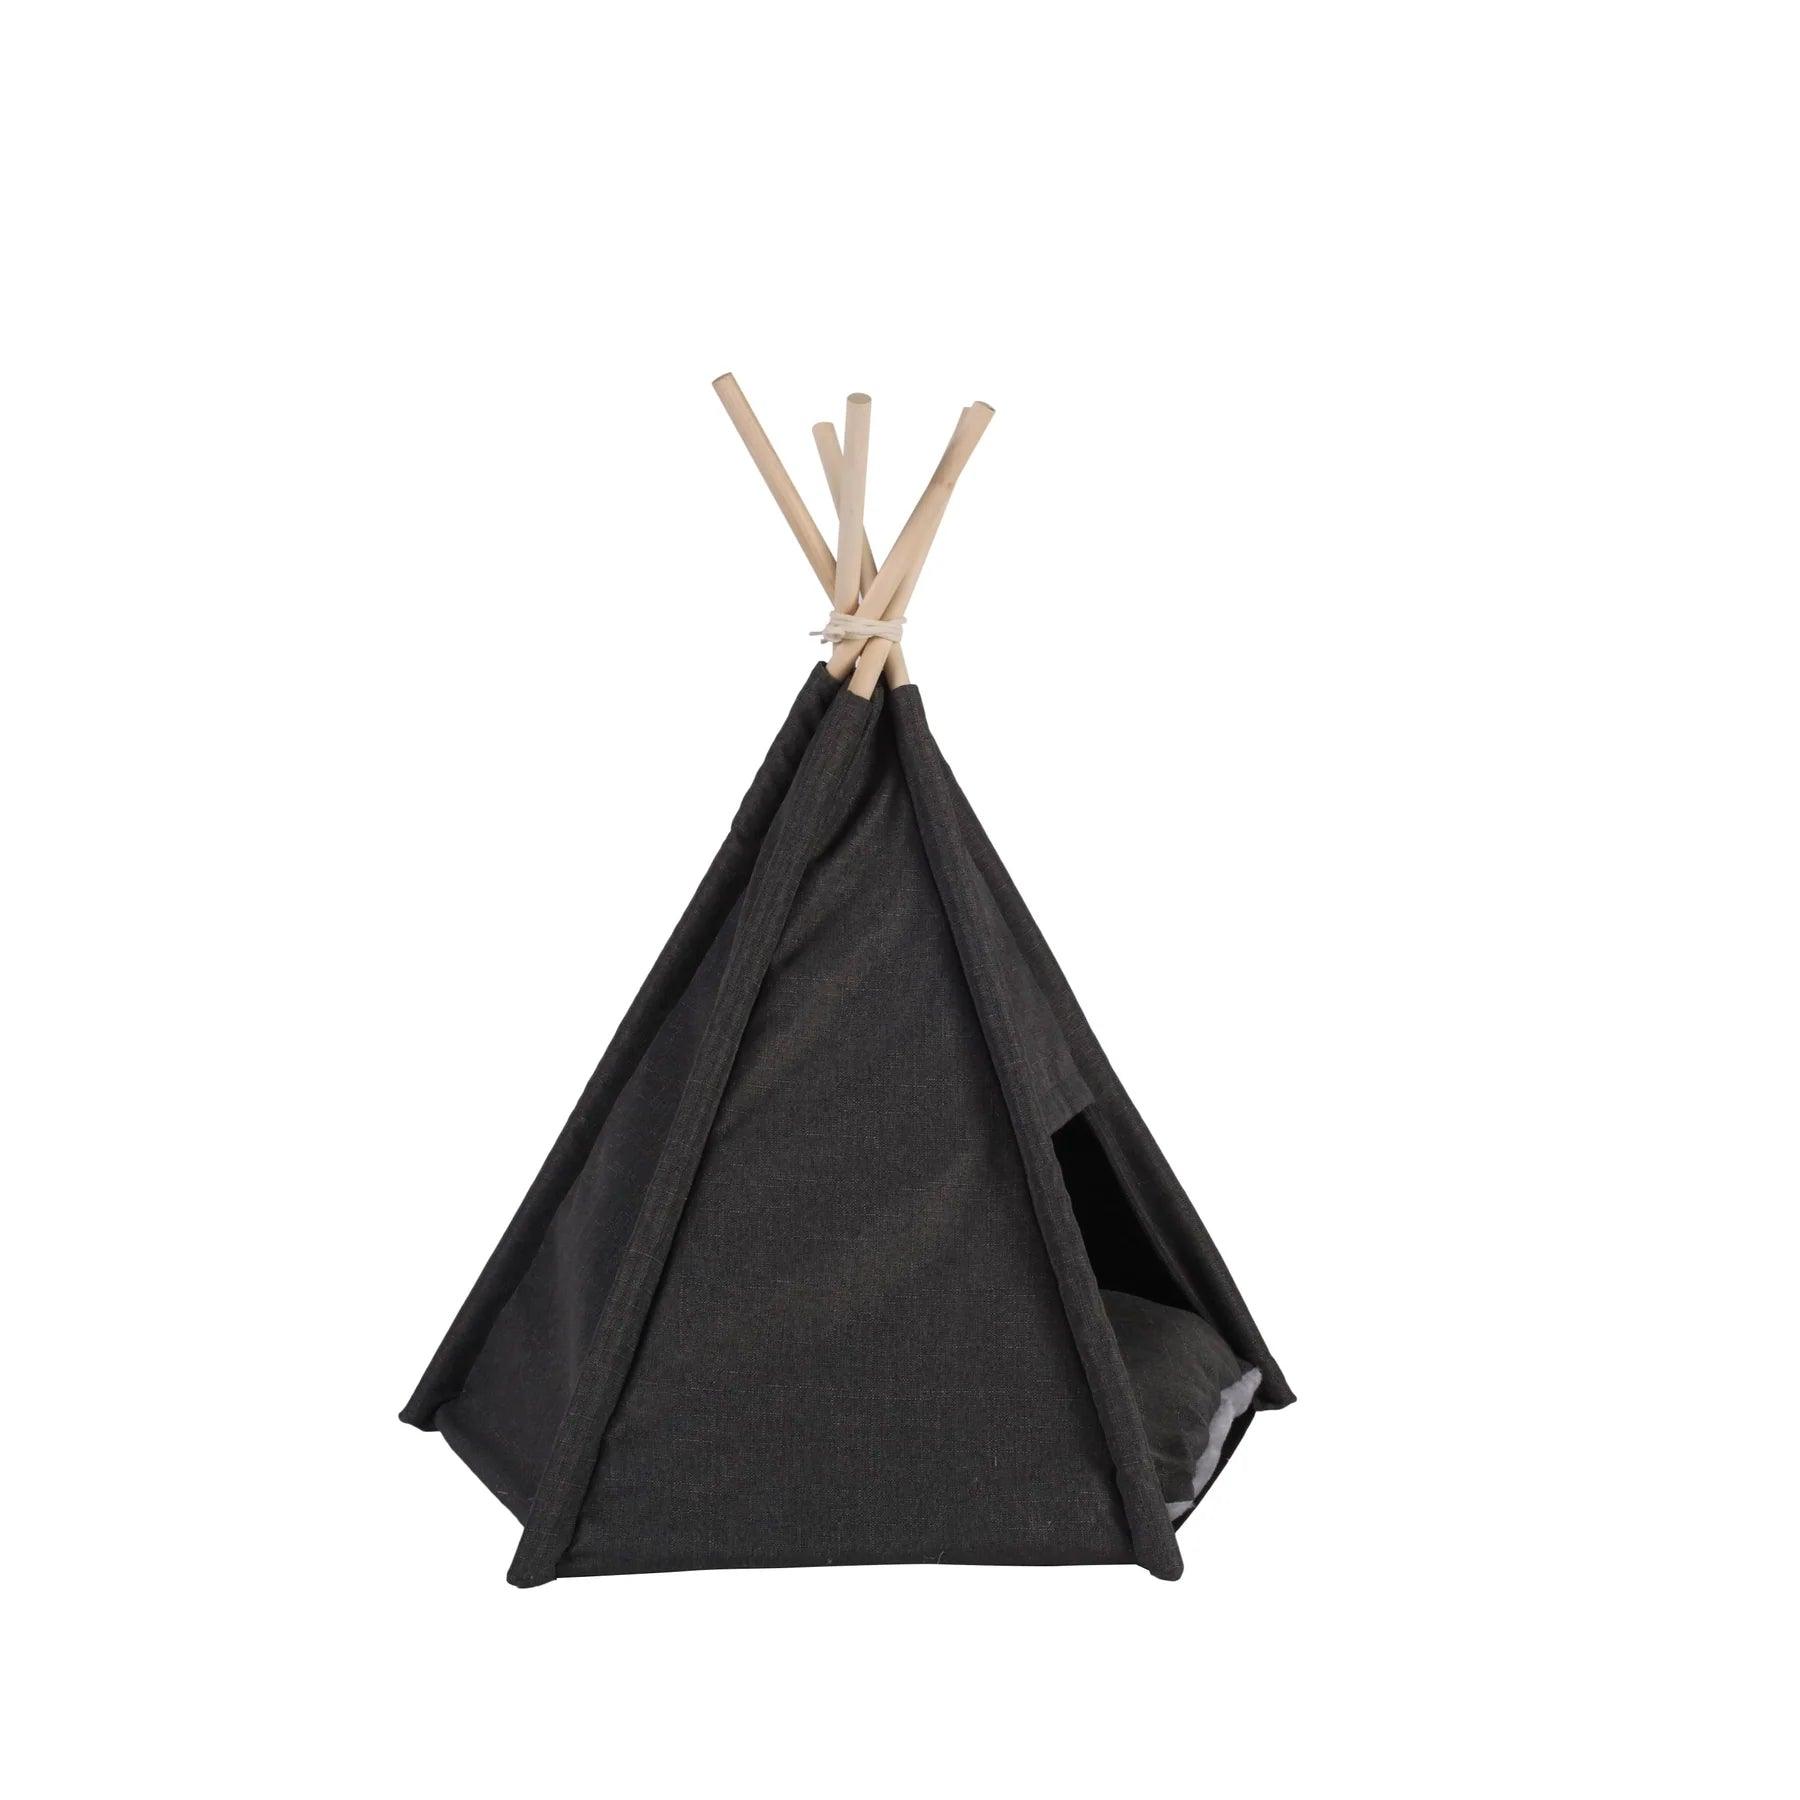 Charlie’s – Pet Teepee Tent – Charcoal - Extra Large - The Pet Standard